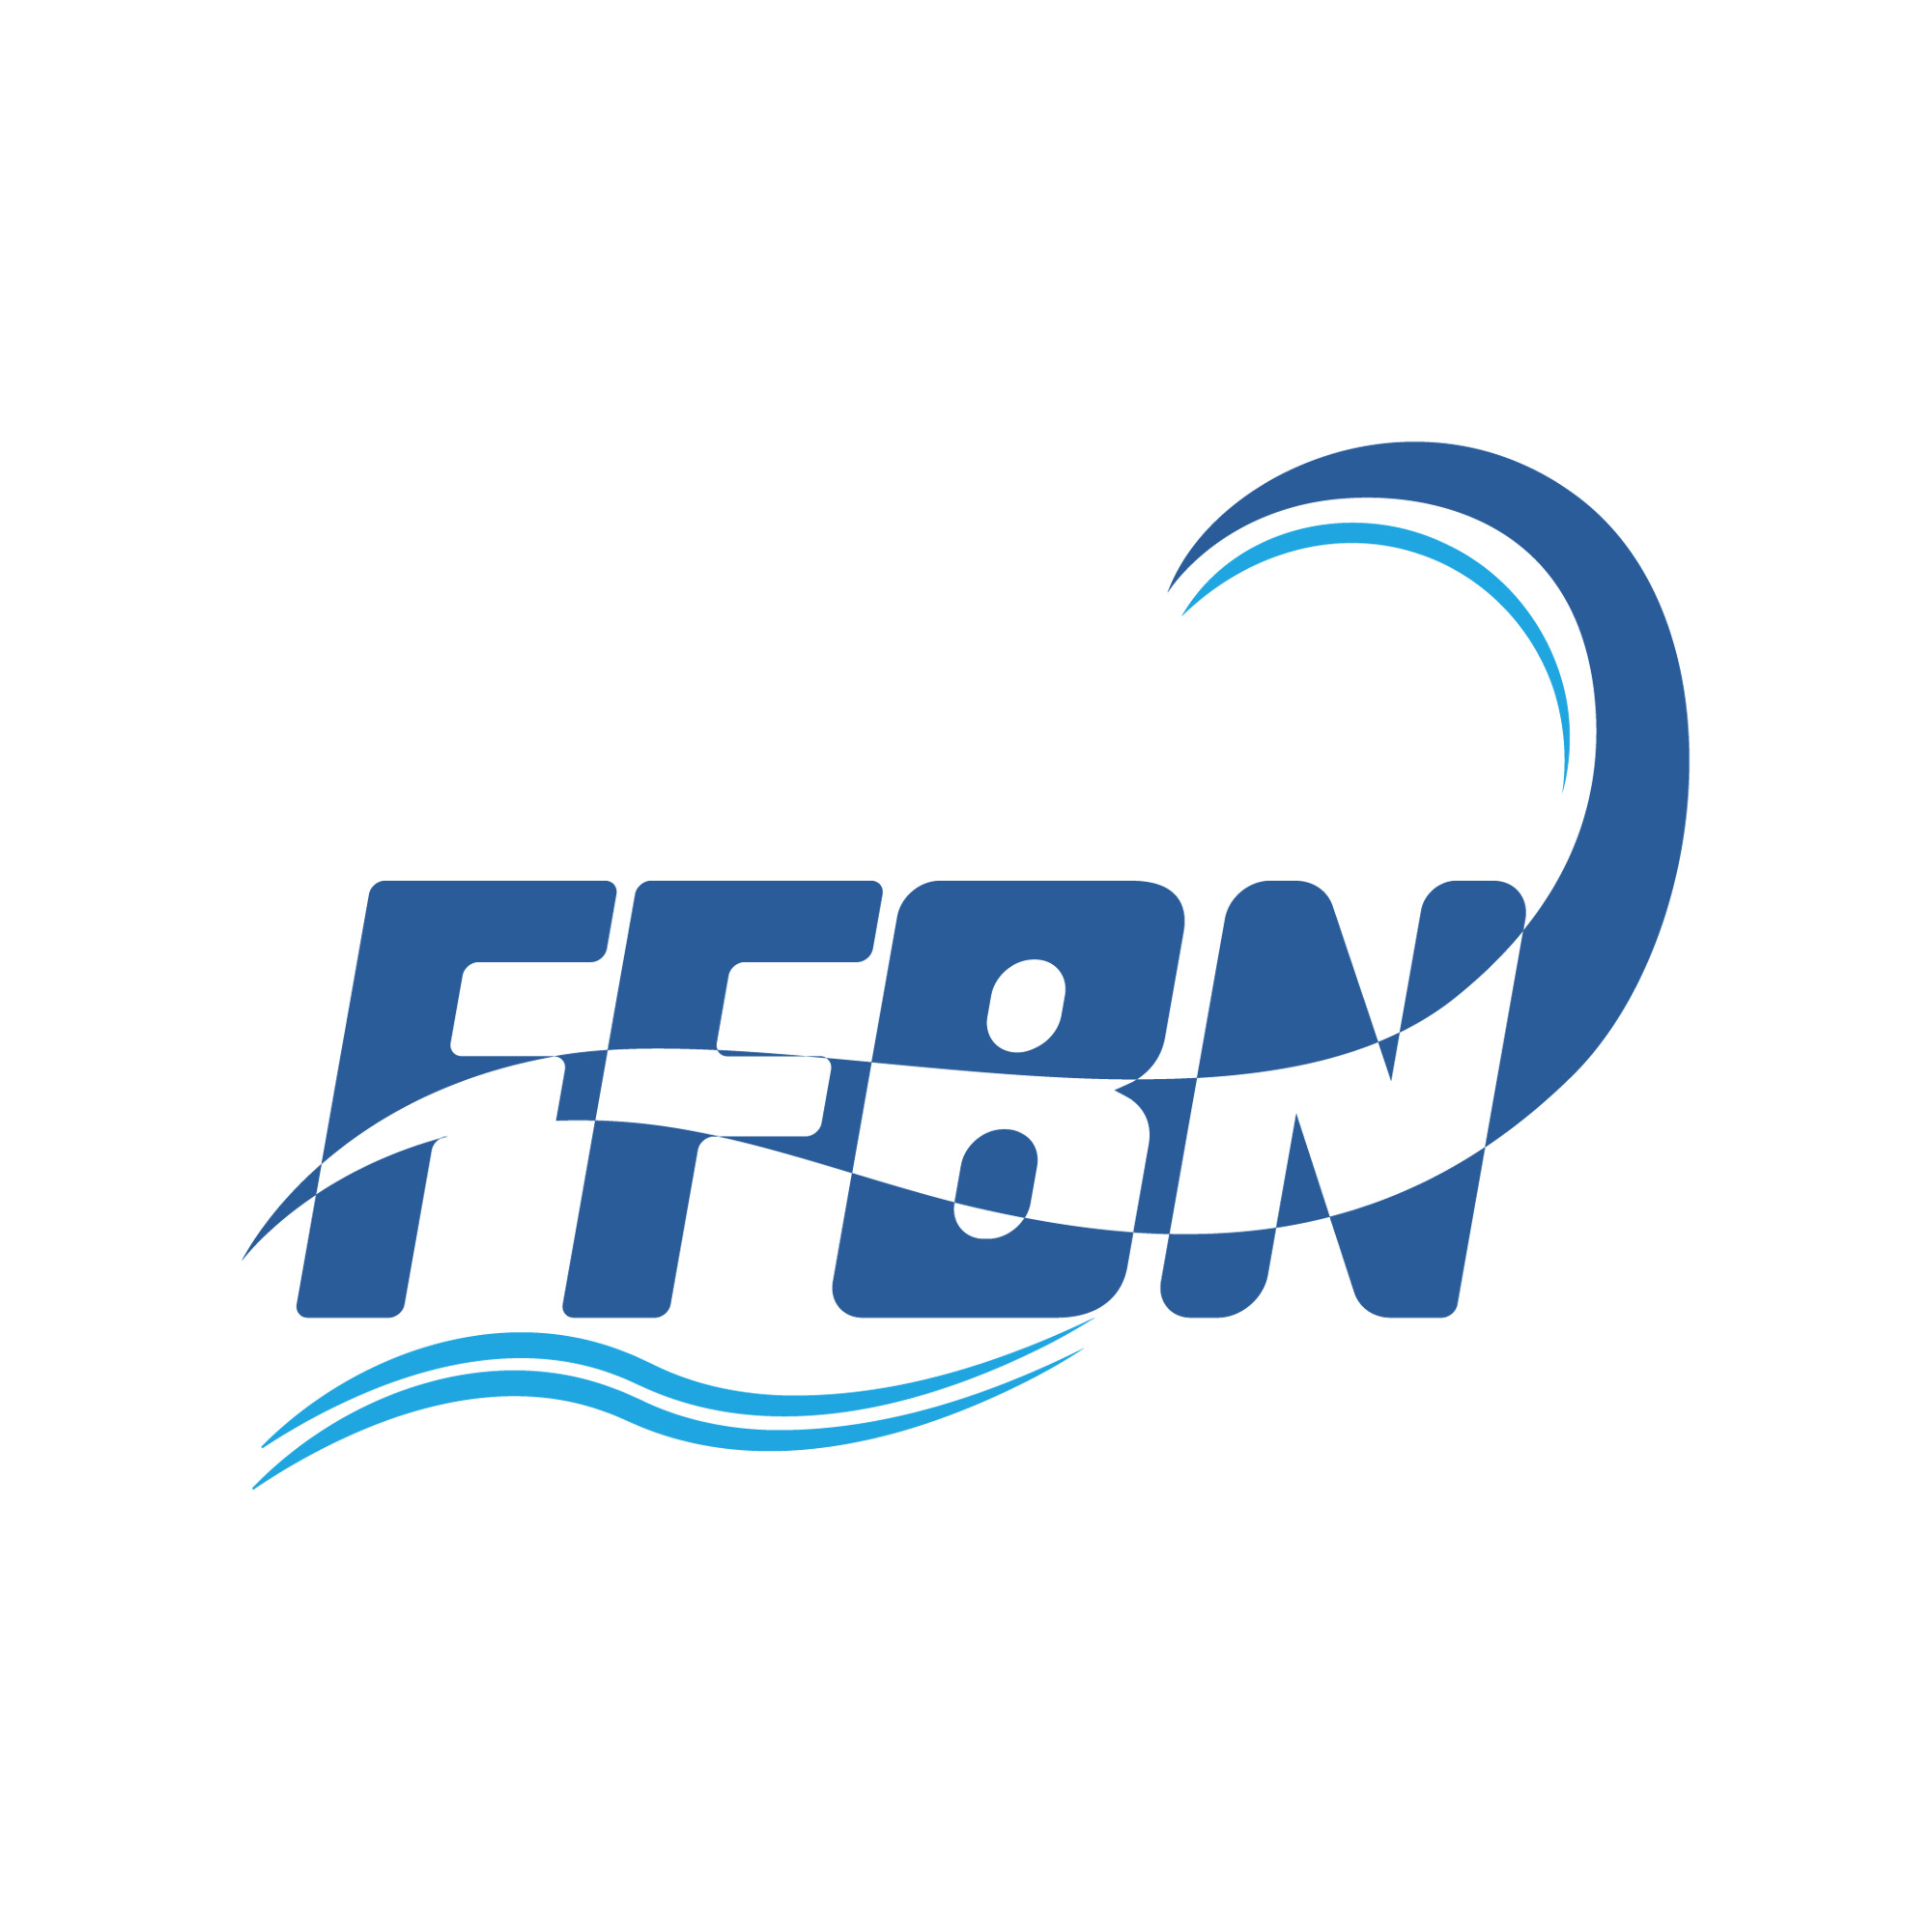 FFBN high performance centre looking for new swimming coach